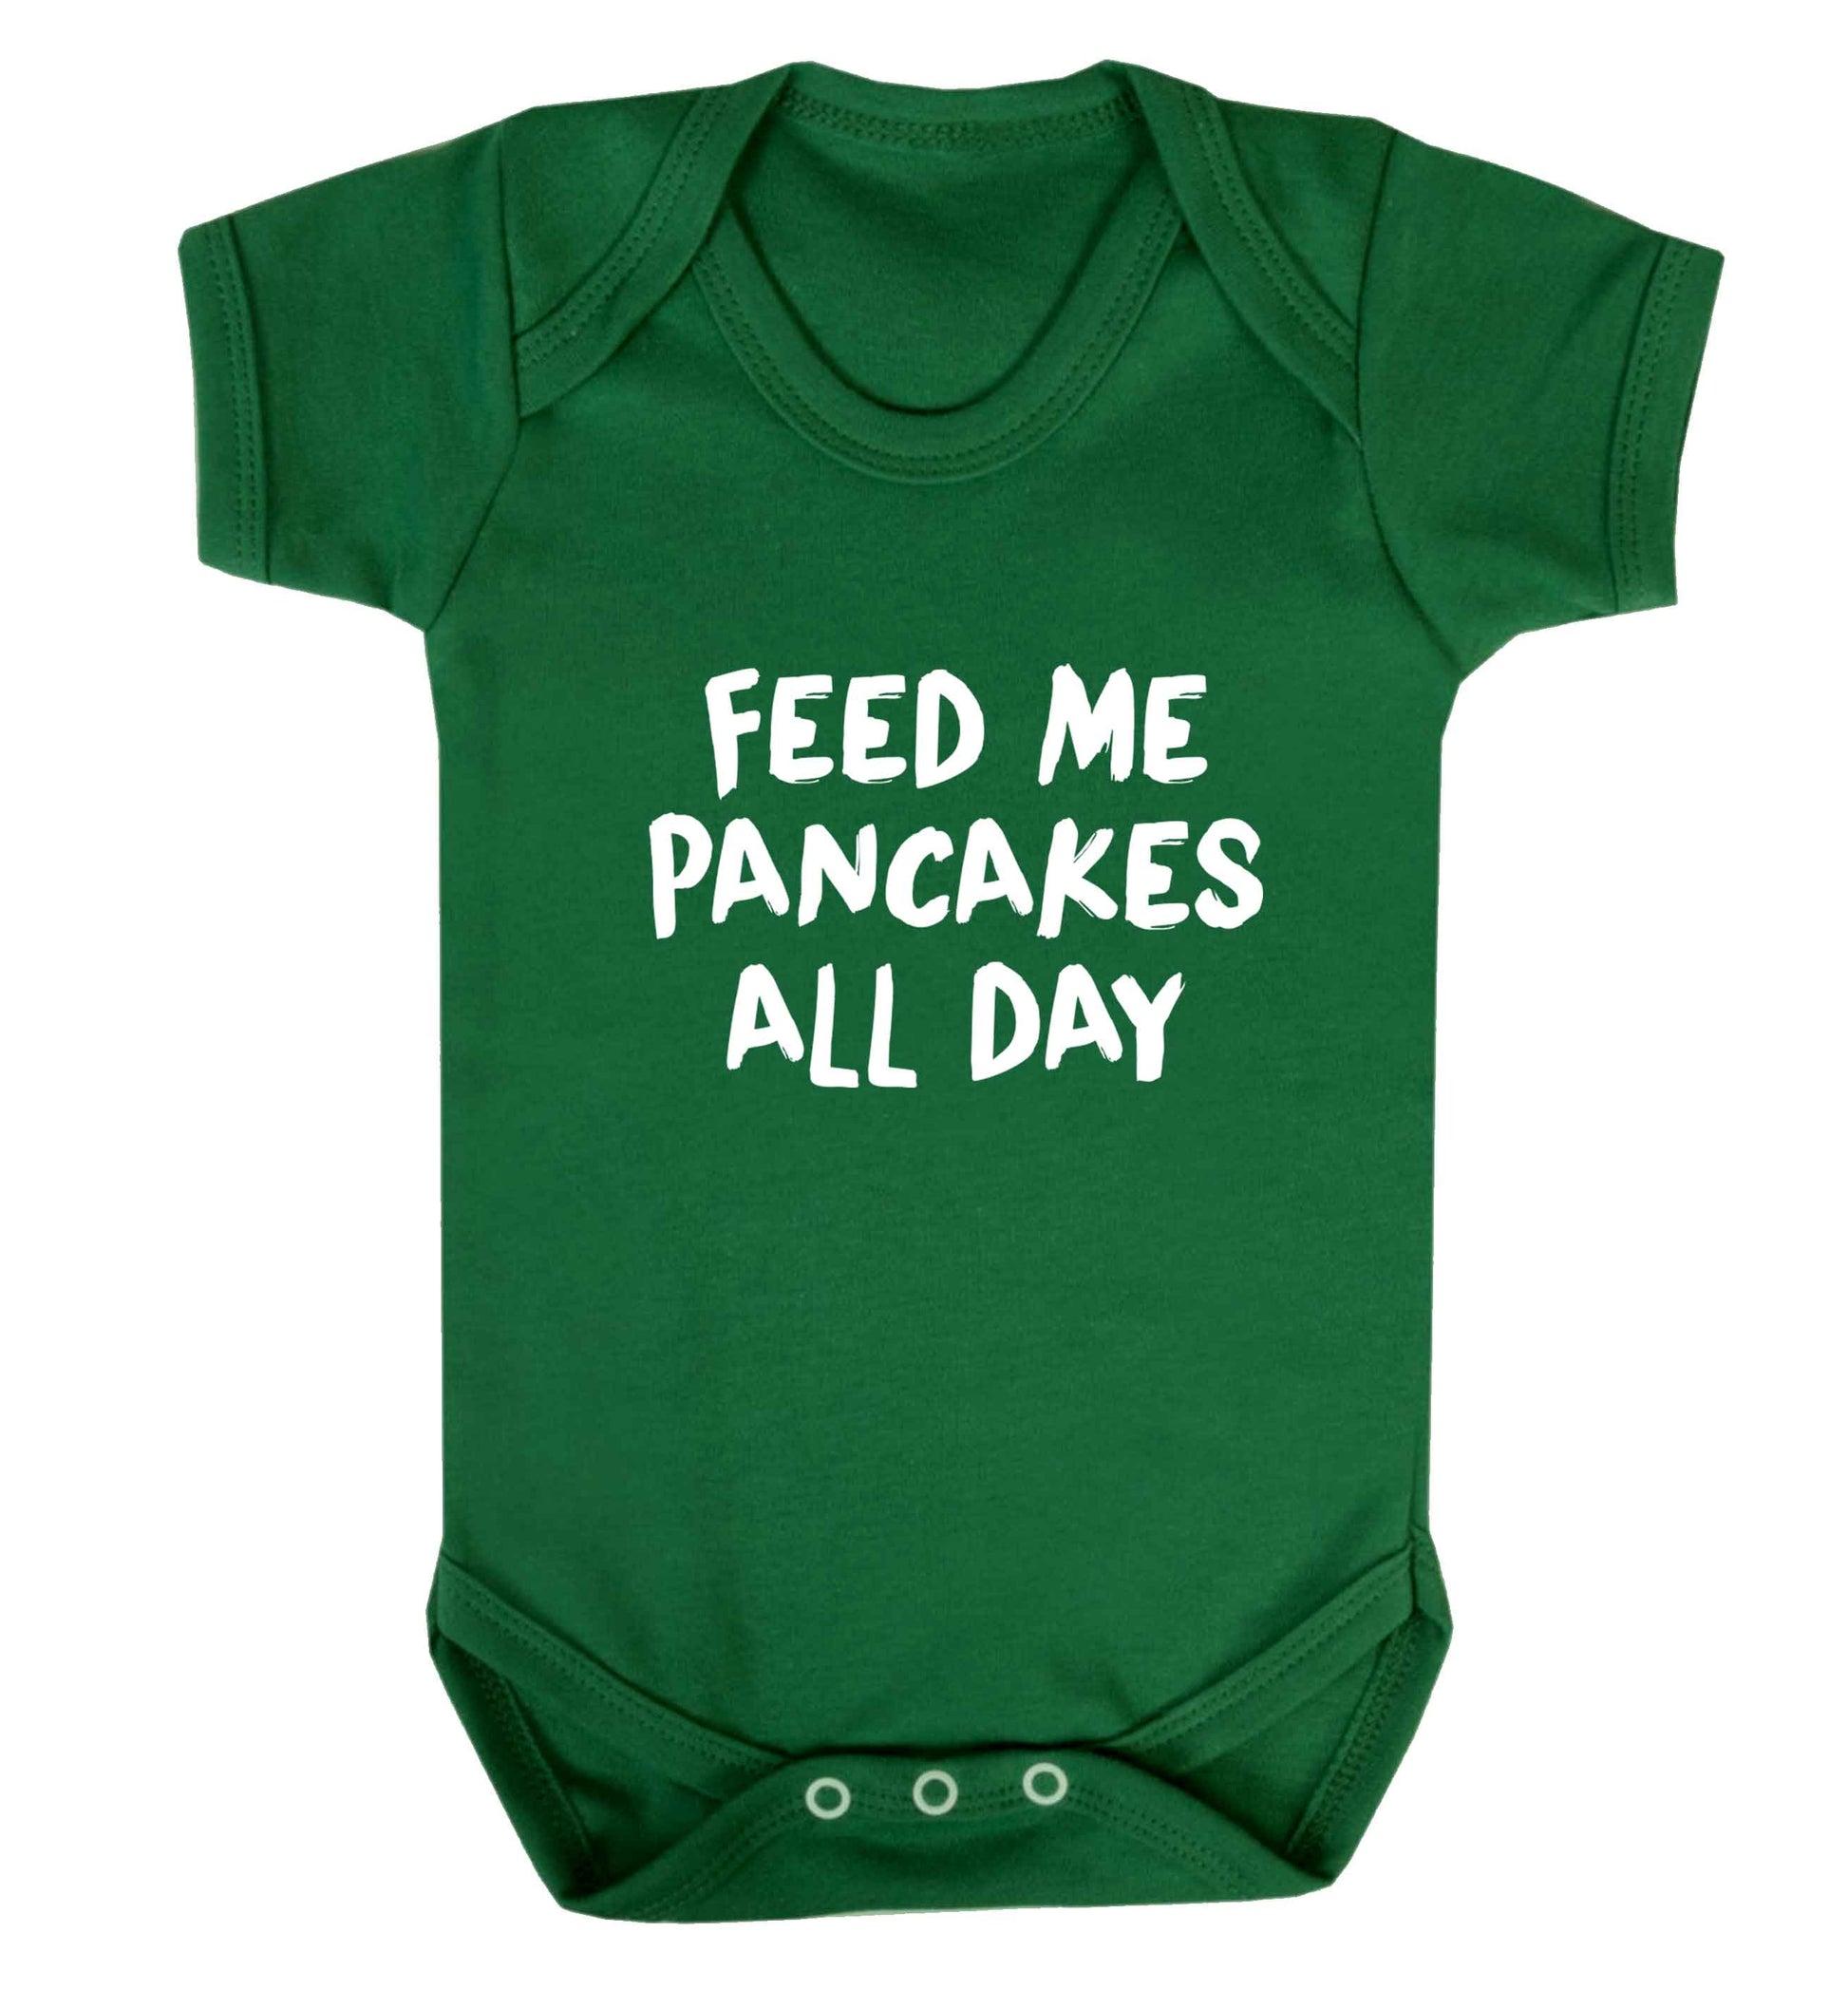 Feed me pancakes all day baby vest green 18-24 months